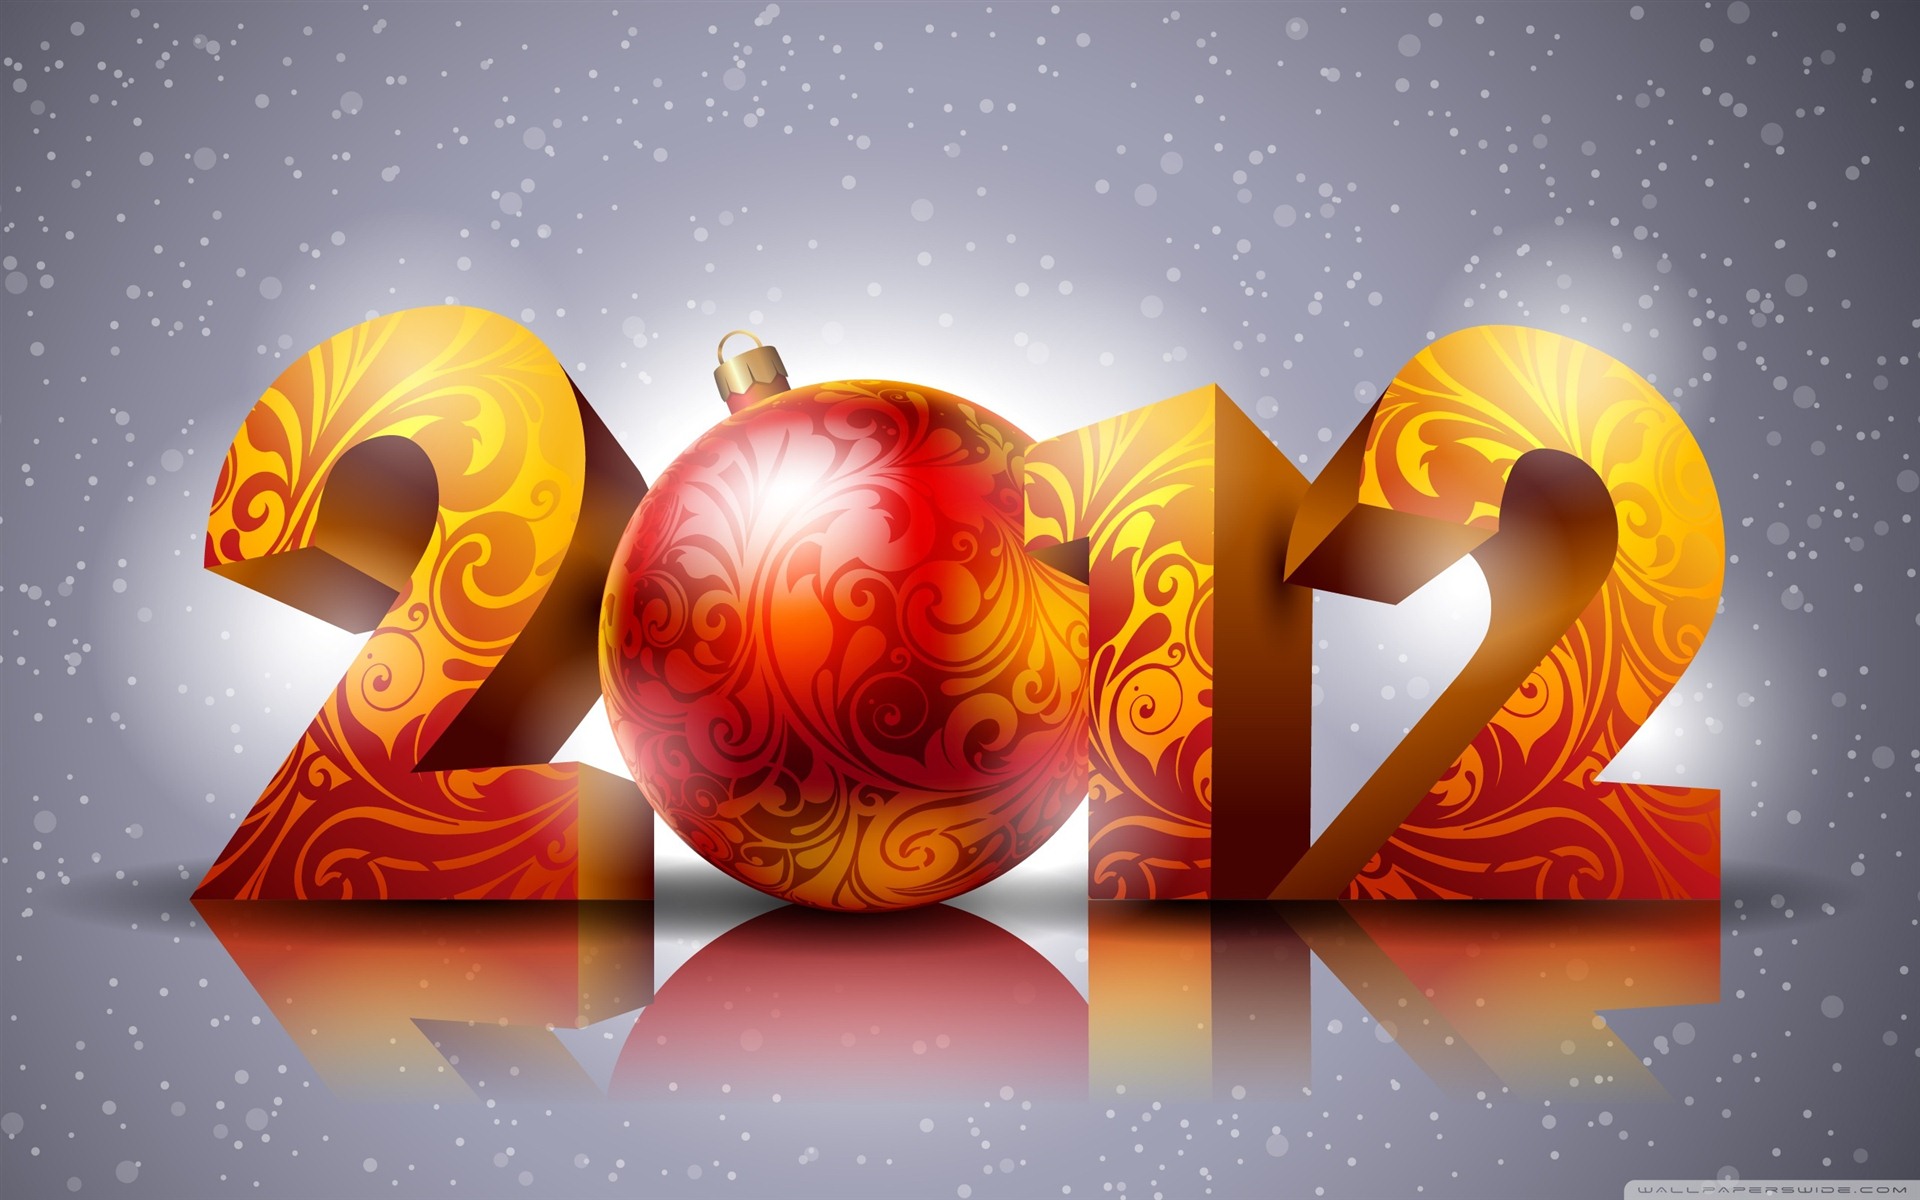 2012 New Year wallpapers (1) #10 - 1920x1200